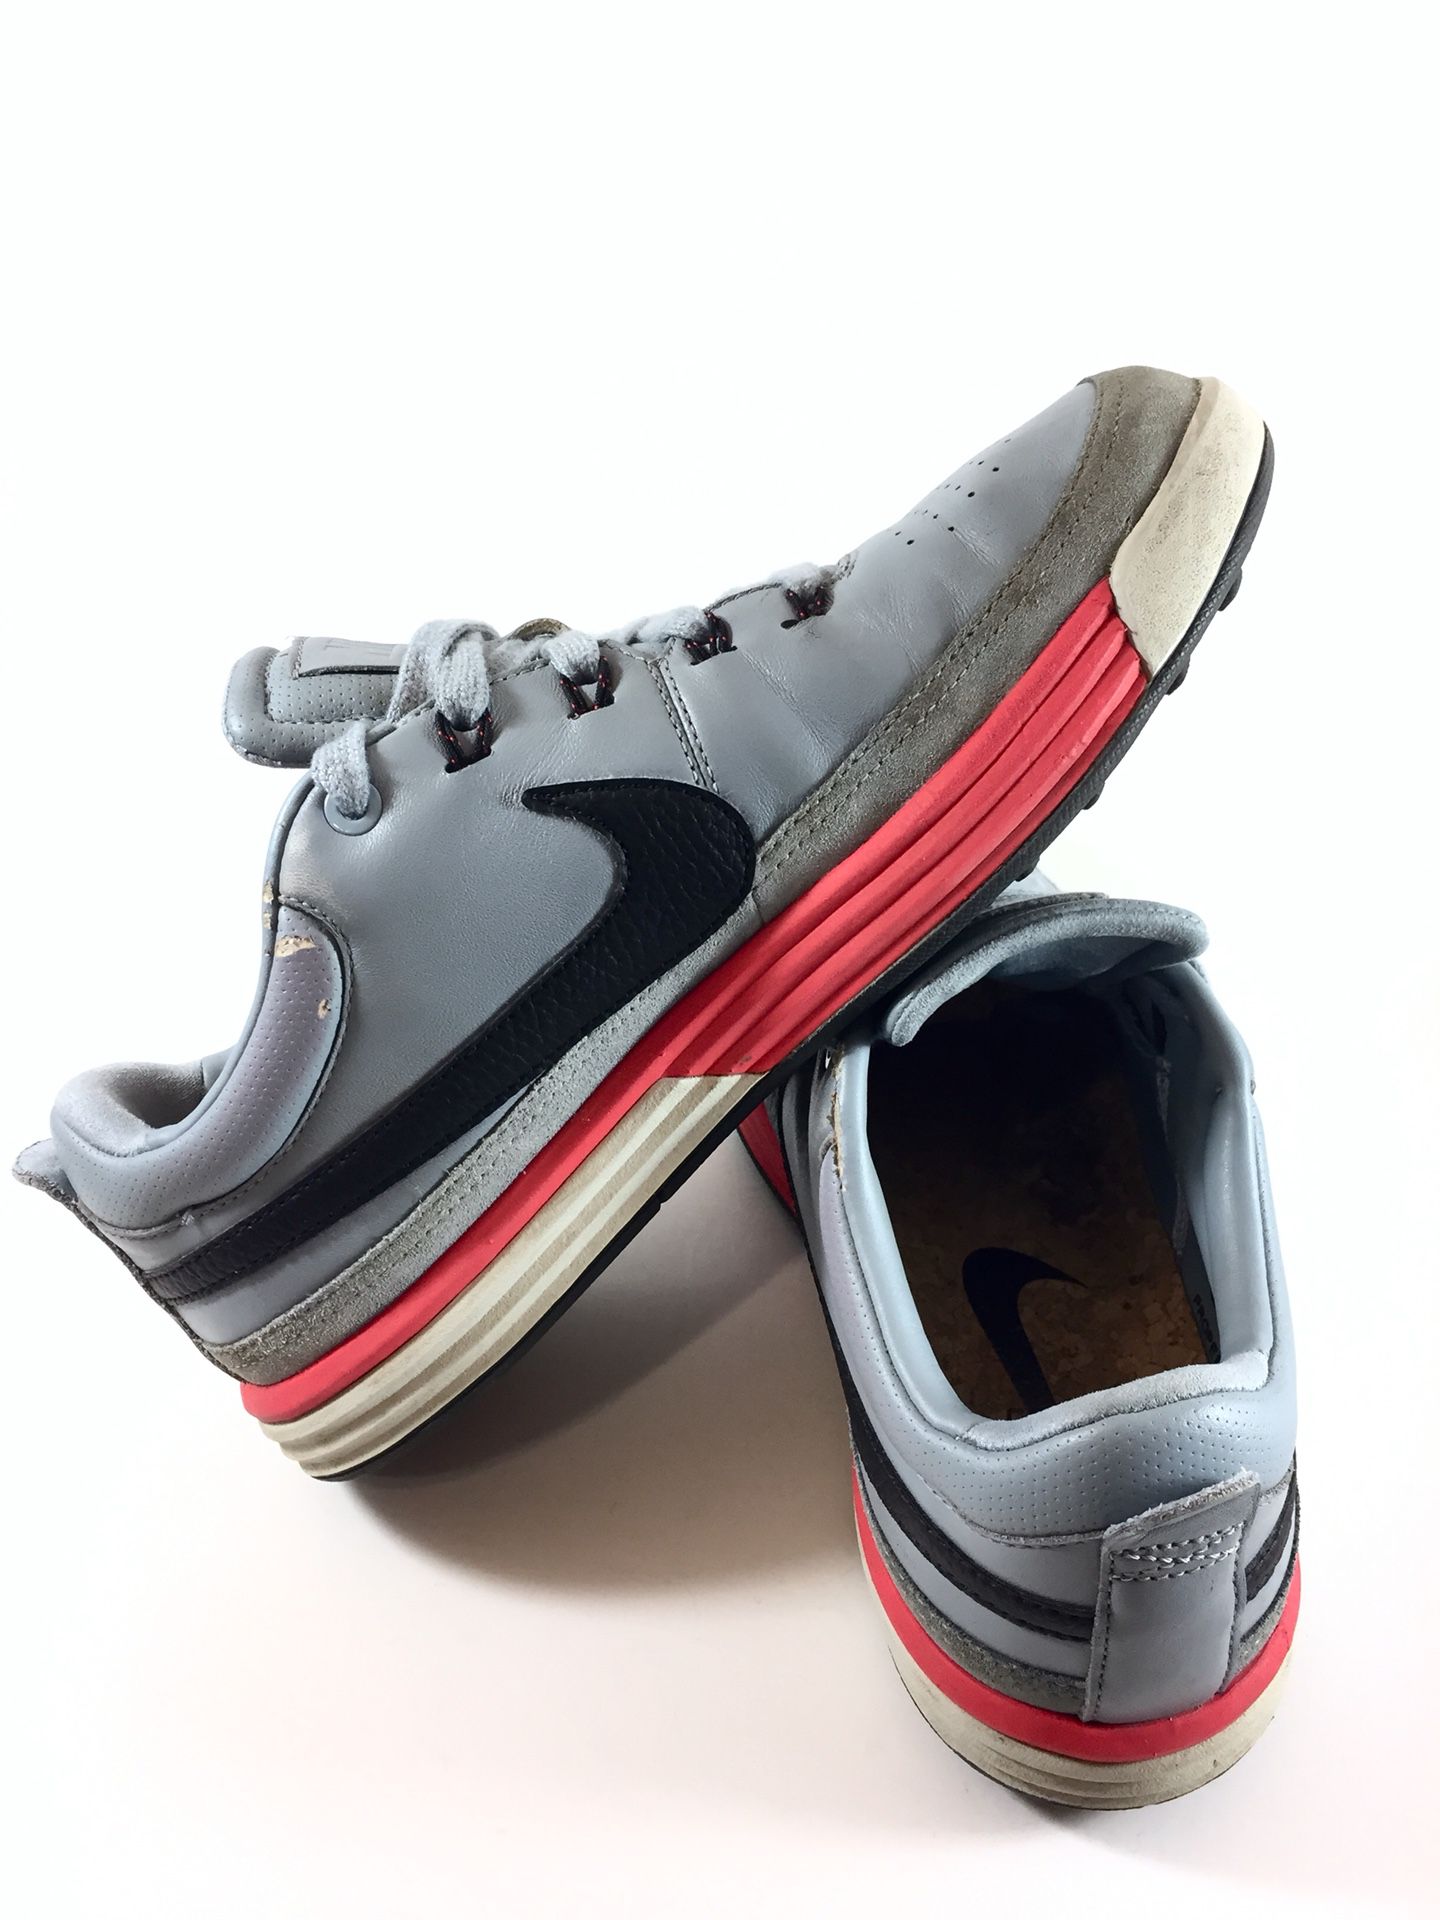 Nike SAMPLE shoes Waverly Spikeless Golf Mens Size 7 Sale in OR - OfferUp